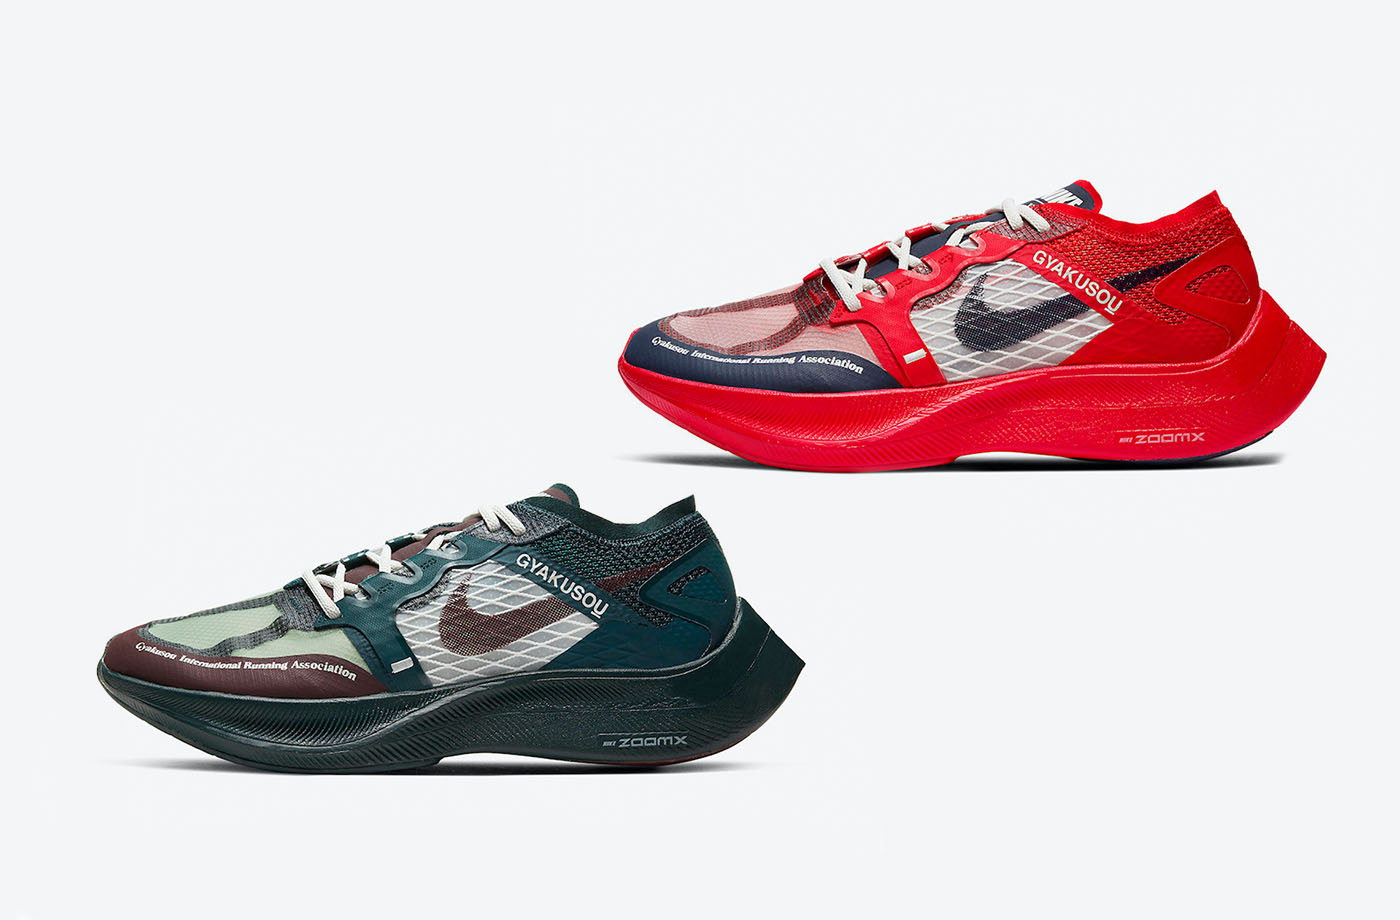 The UNDERCOVER x Nike Gyakusou ZoomX VaporFly NEXT% 2 Collection